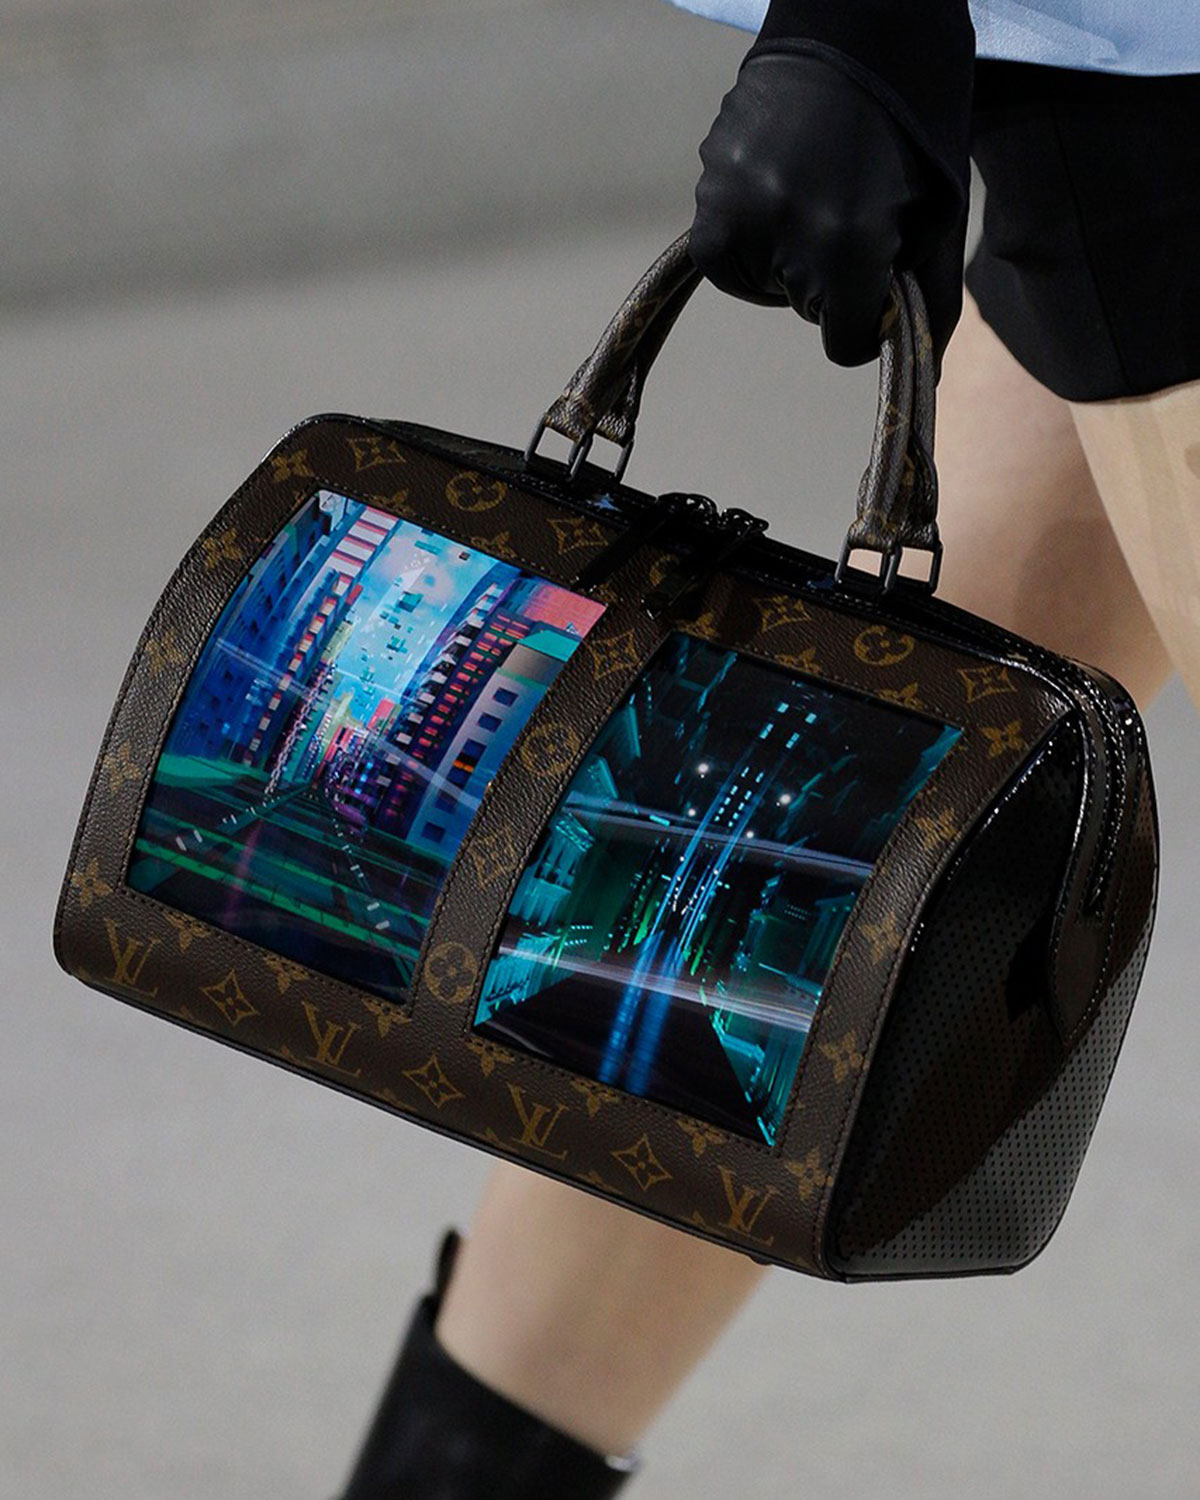 Could this Louis Vuitton Cruise 2020 LED screen bag be the future of bags?